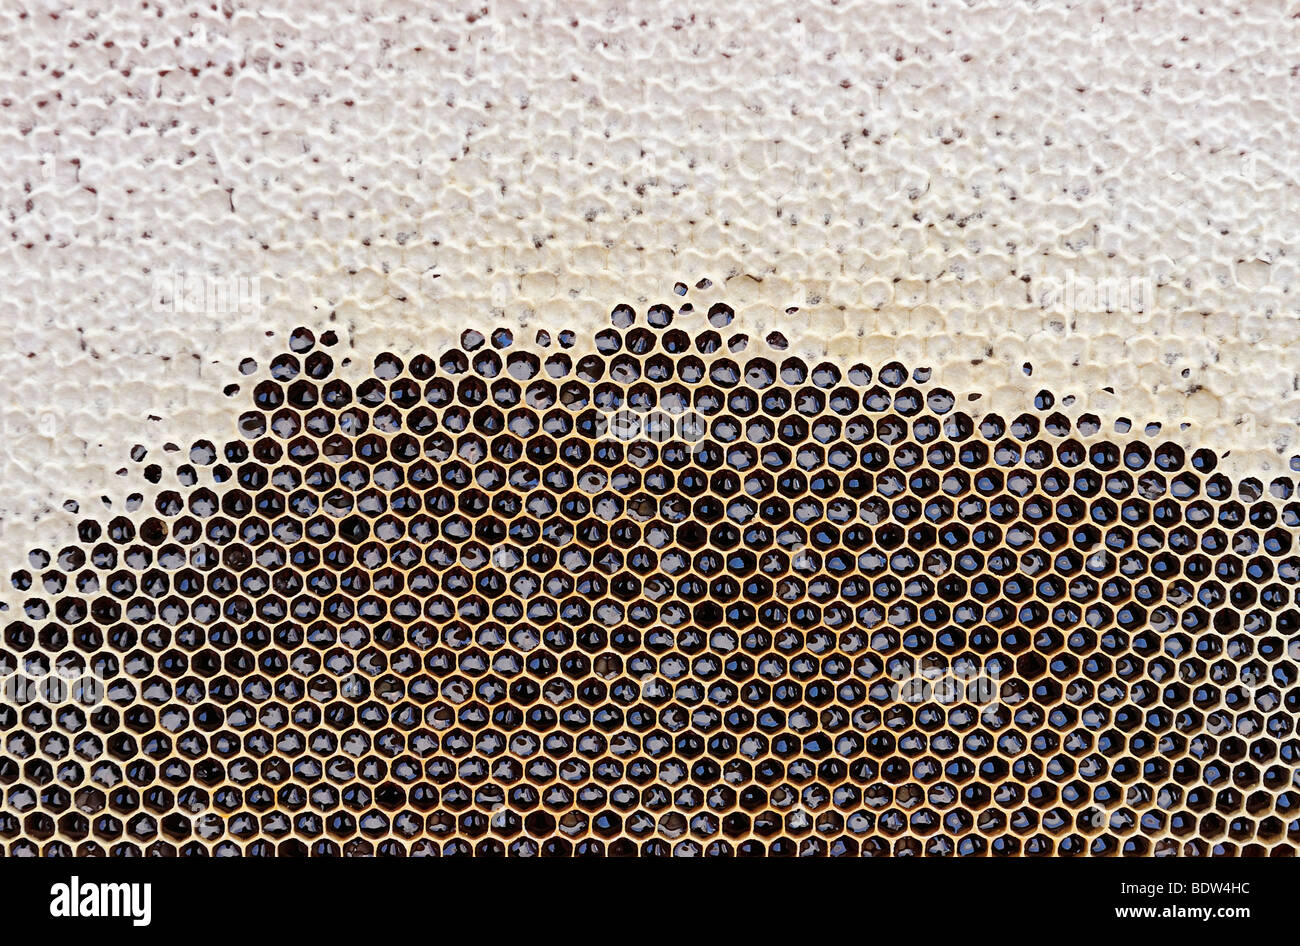 Honeycomb, still partially covered Stock Photo